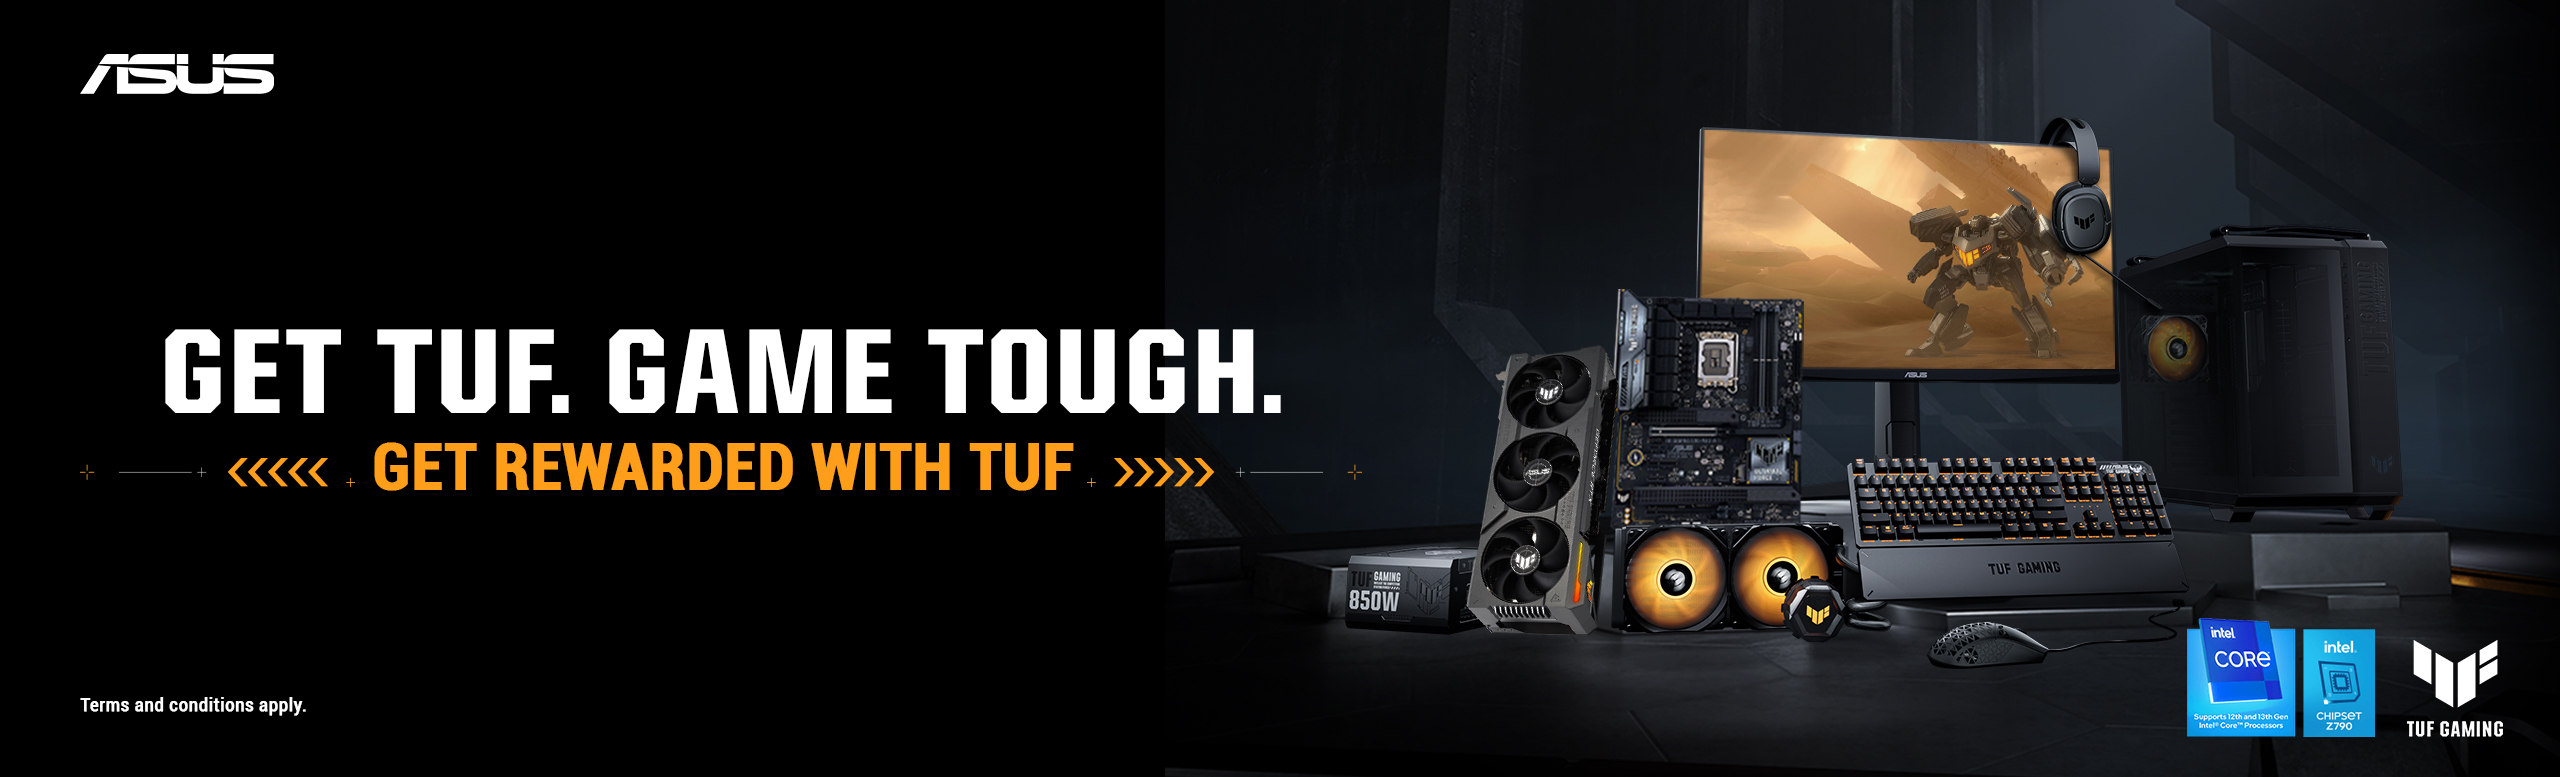 TUF Gaming  components and peripherals